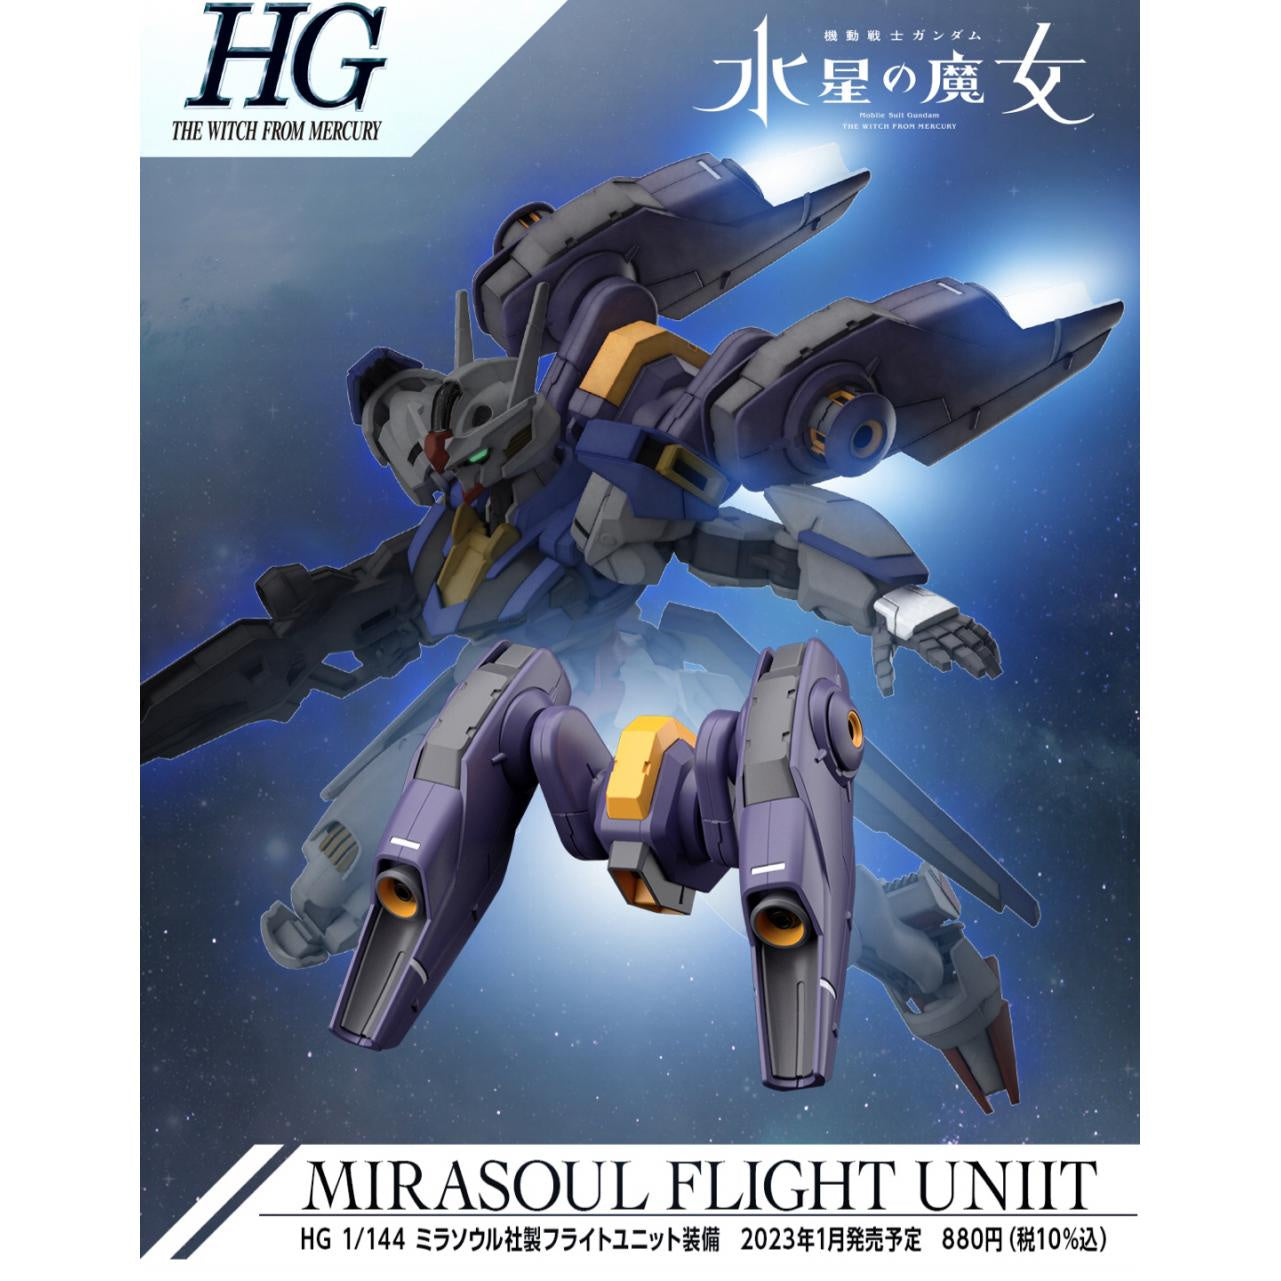 HG 1/144 The Witch From Mercury #13 Mirasoul Flight Unit